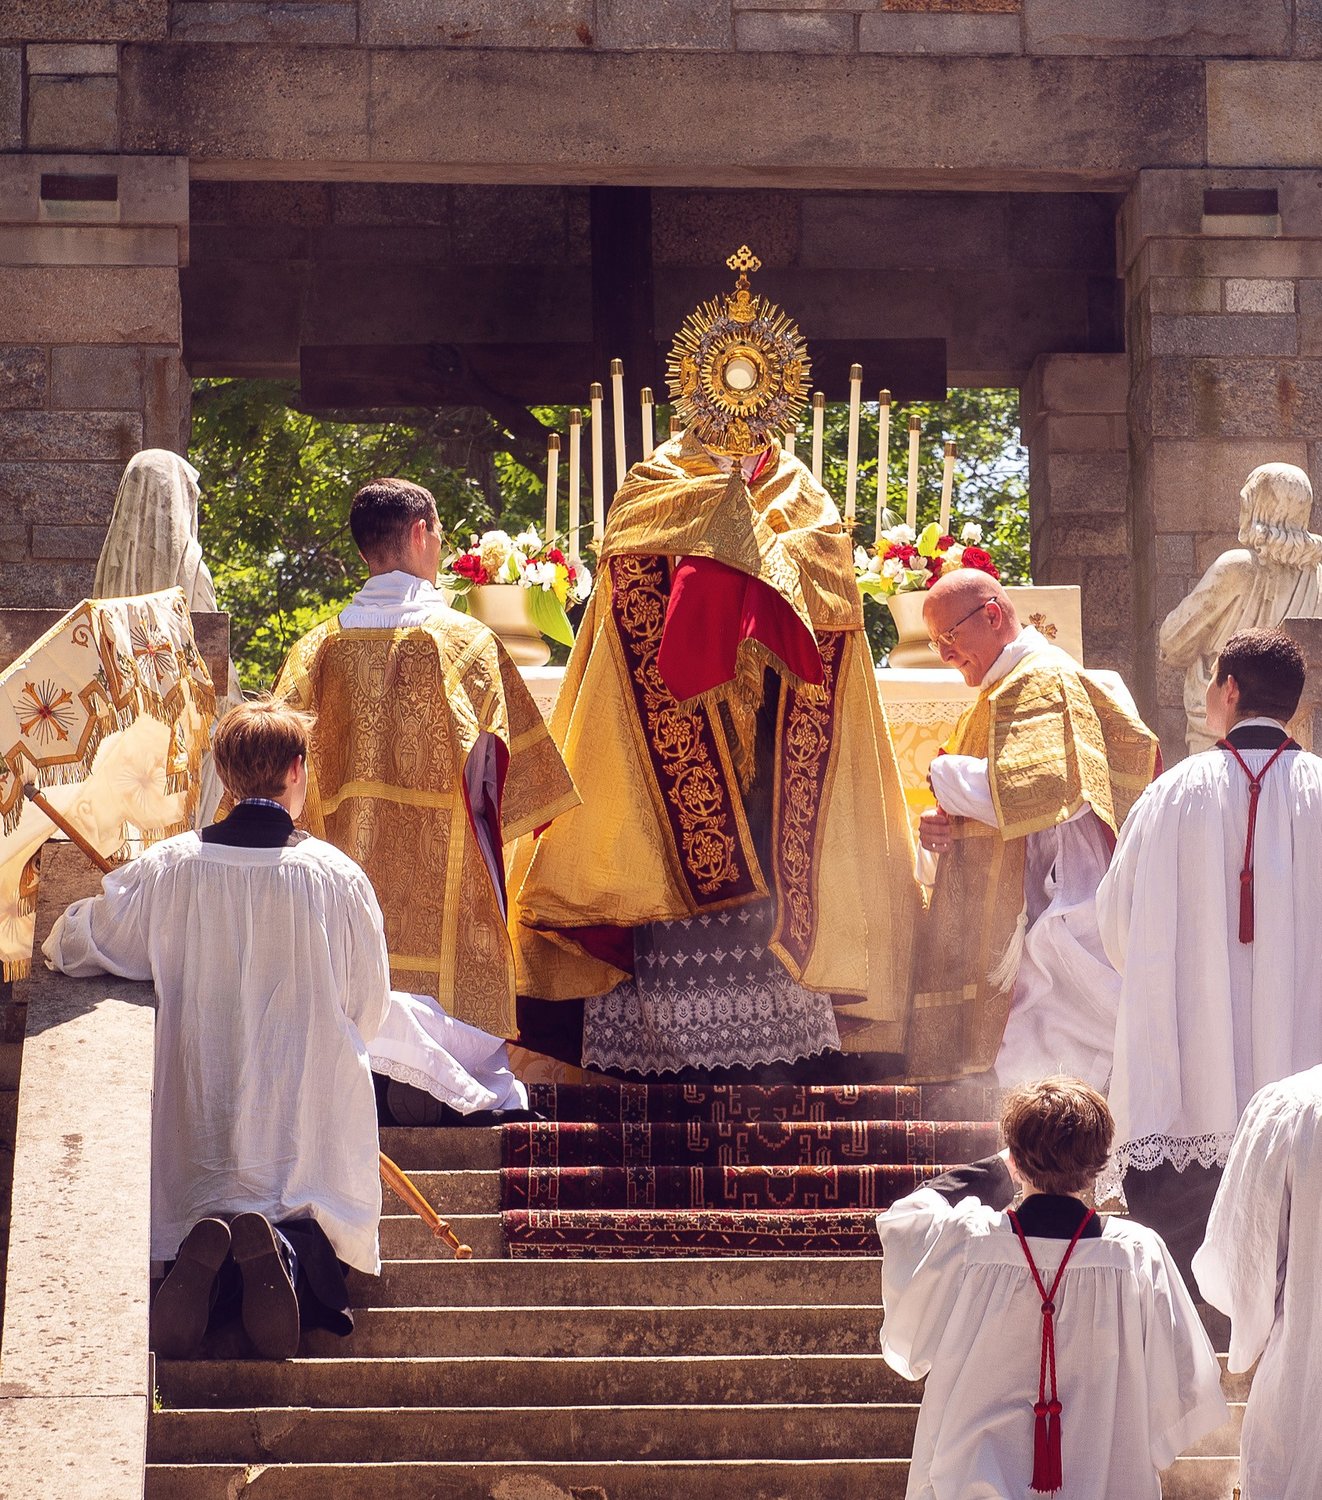 Many gathered at the Shrine of the Little Flower to celebrate the Solemnity of the Most Holy Body and Blood of Christ, also known as the Solemnity of Corpus Christi.